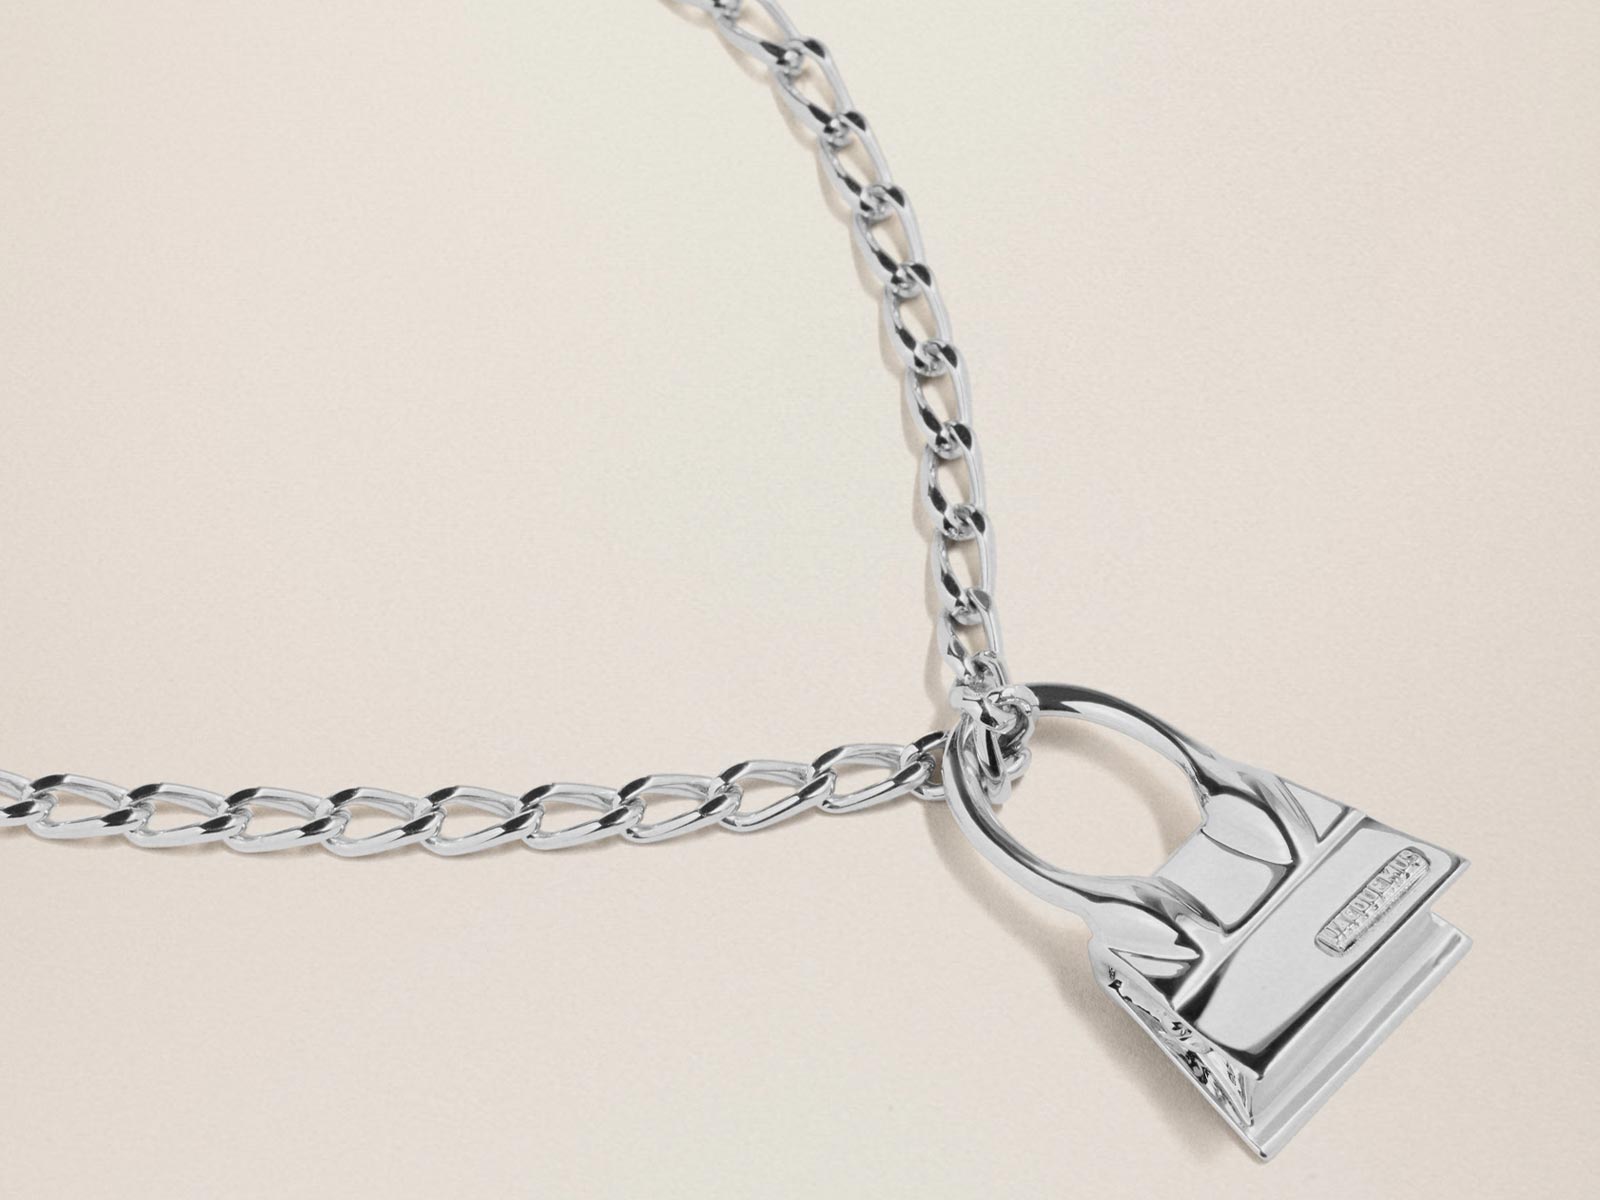 The iconic Le Chiquito by Jacquemus is reinvented in the form of a necklace